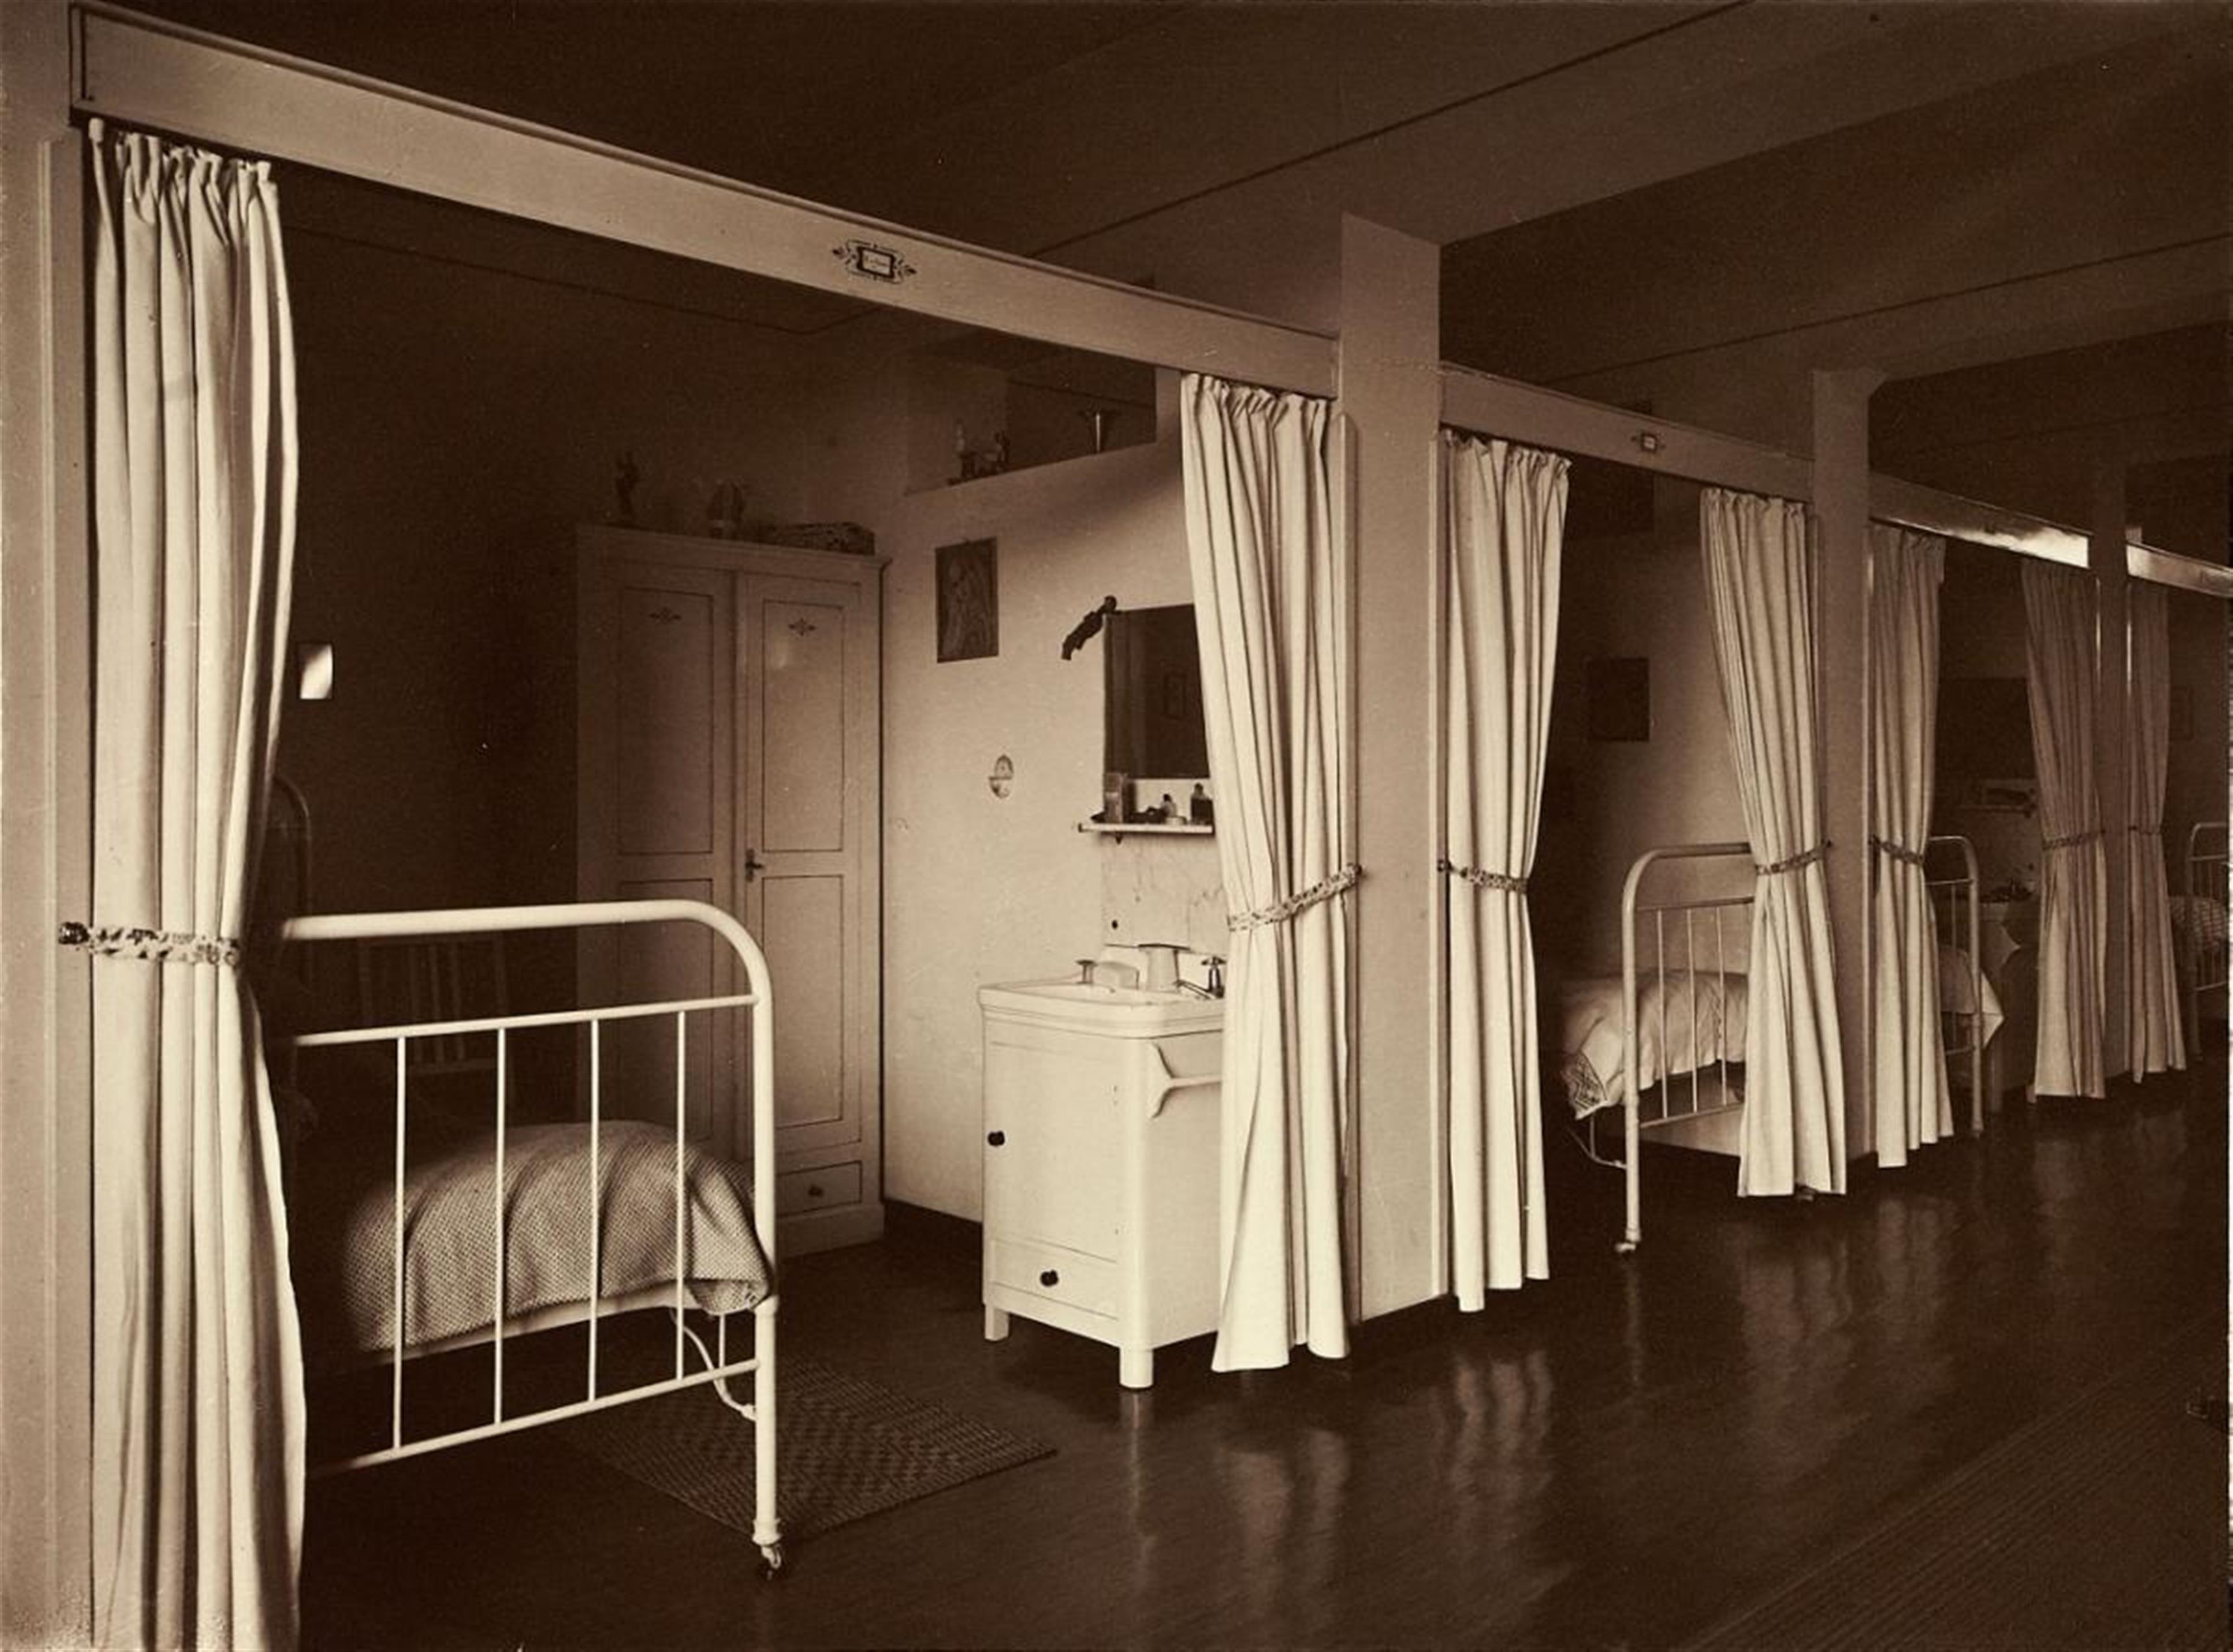 Werner Mantz - UNTITLED (HOSPITAL WARD AT THE COLLEGE OF EDUCATION, MAASTRICHT)